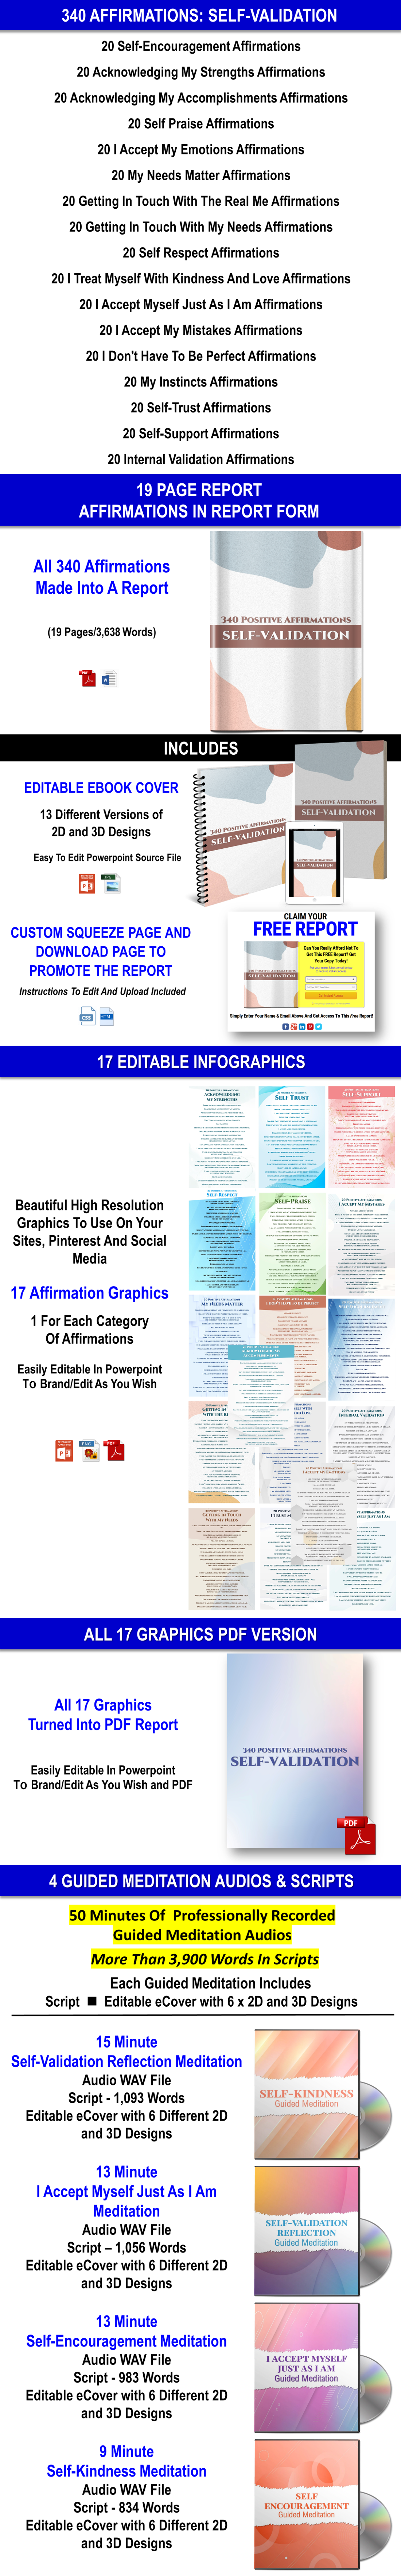 Self-Validation: 340 Affirmations And Guided Meditations Giant Content Pack PLR Rights